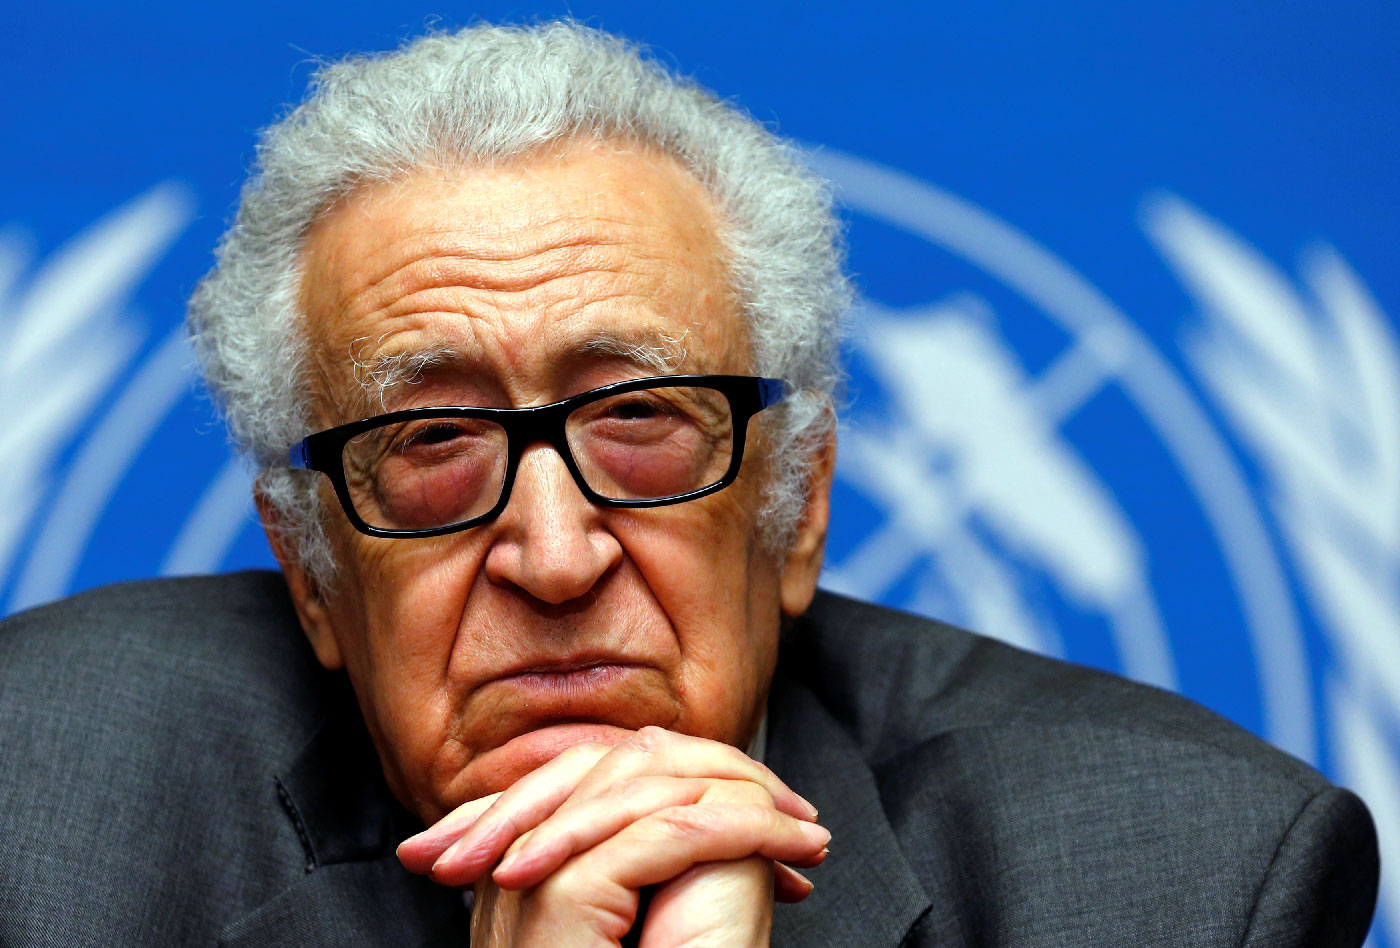 UN-Arab League envoy for Syria Lakhdar Brahimi pauses during a news conference at the United Nations European headquarters in Geneva January 27, 2014.